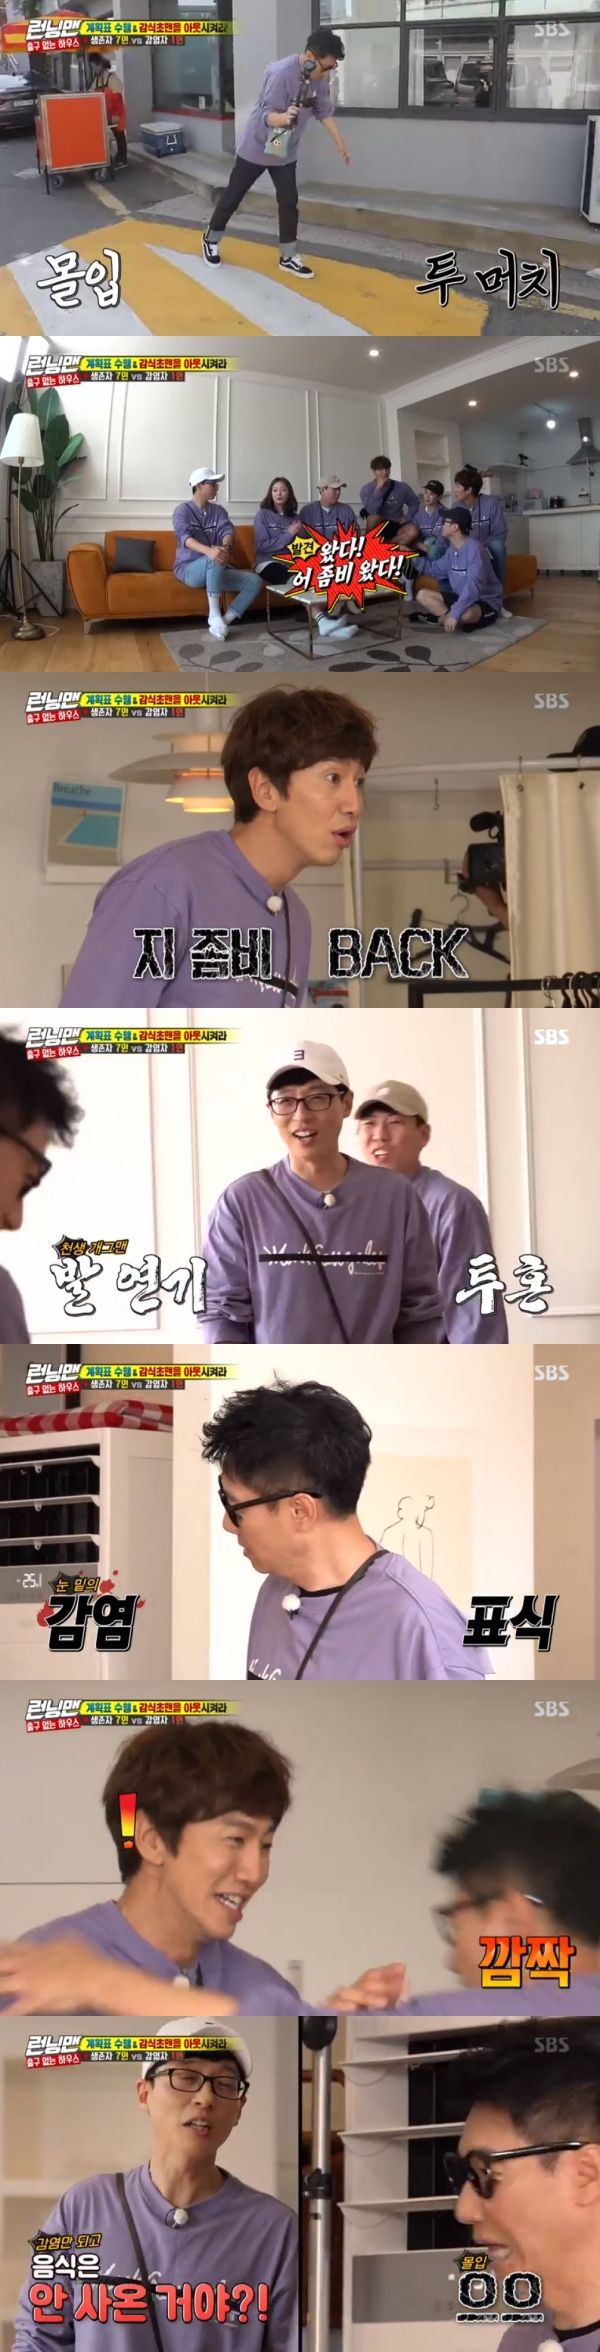 Yoo Jae-Suk has been in a row at Ji Suk-jin Zombie 2: The Dead are Among Us Acting.On SBS Running Man broadcast on the 20th, Yoo Jae-Suk was shown direct to Ji Suk-jins clumsy Zombie 2: The Dead are Among Us Acting.On this day, a mission was given to find members infected with persimmon vinegar.Ji Suk-jin carried out a laughing-bearing mission and returned to start mimicking persimmon vinegar Zombie 2: The Dead are Among Us.Zombie 2: Lee Kwang-soo, who watched The Dead are Among Us Acting, laughed at Ji Suk-jins name tag, and Yoo Jae-Suk added that Zombie 2: The Dead are Among Us speech doesnt have to be that way toward Ji Suk-jin.Ji Suk-jin said, Zombie 2: The Dead are Among Us will do it. Zombie 2: The Dead are Among Us was posing, and Yoo Jae-Suk said, Its weird.Ji Suk-jin laughed, saying firmly, I will take care of it.Yoo Jae-Suk, who watched, could not stand the clumsy Acting and said, Is this and all day?